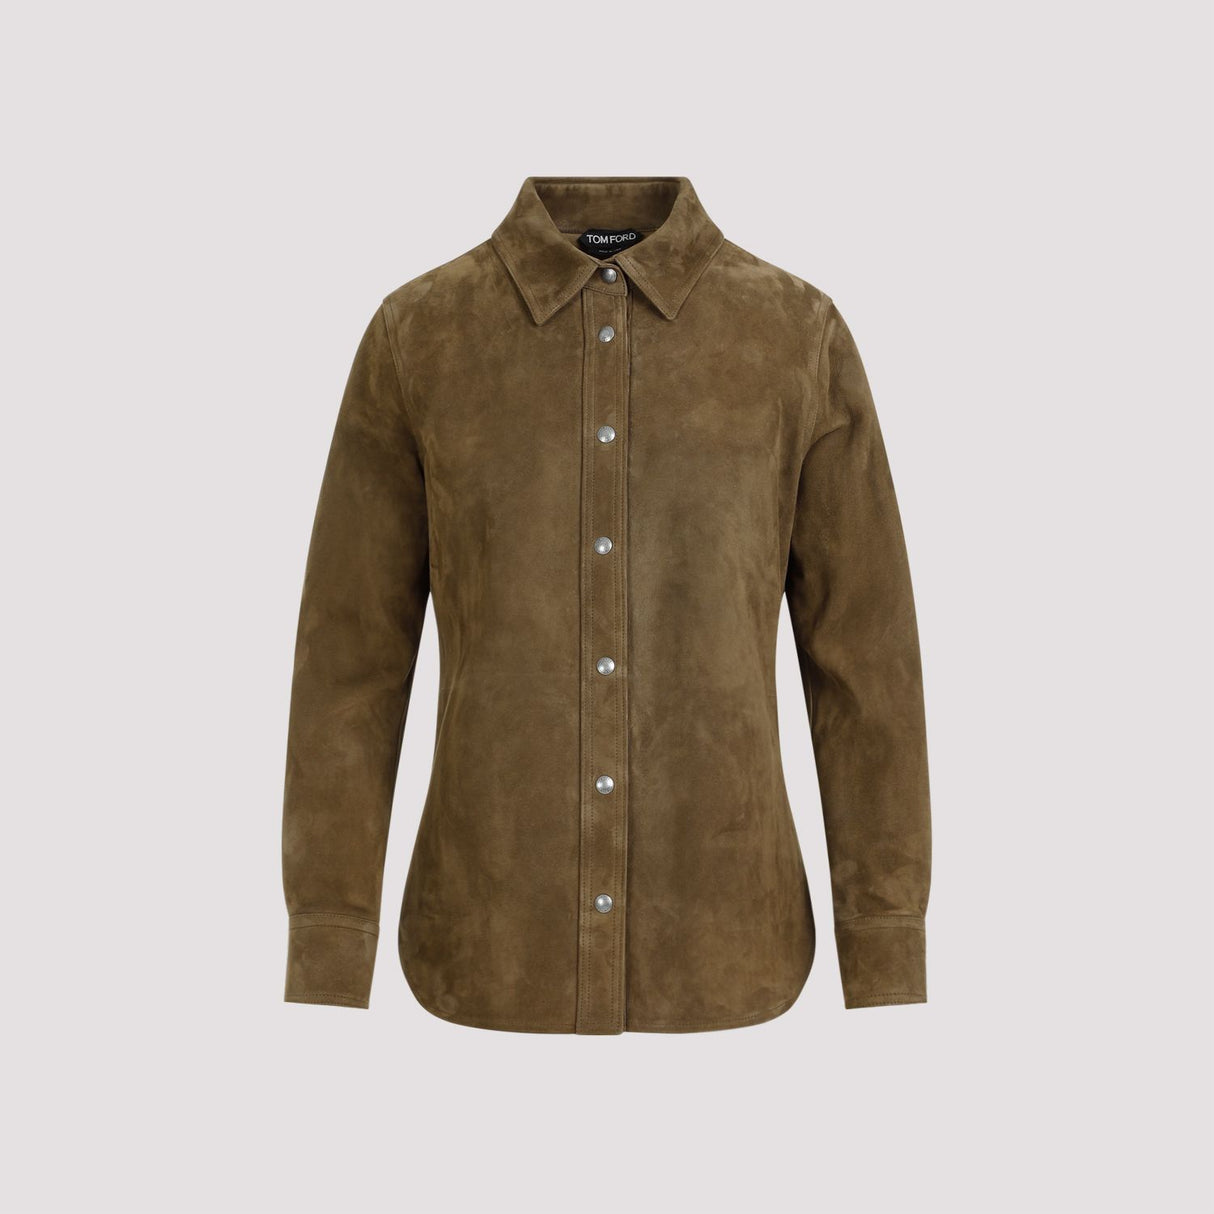 TOM FORD Luxurious Soft Suede Shirt for Women - Luxurious Brown Leather